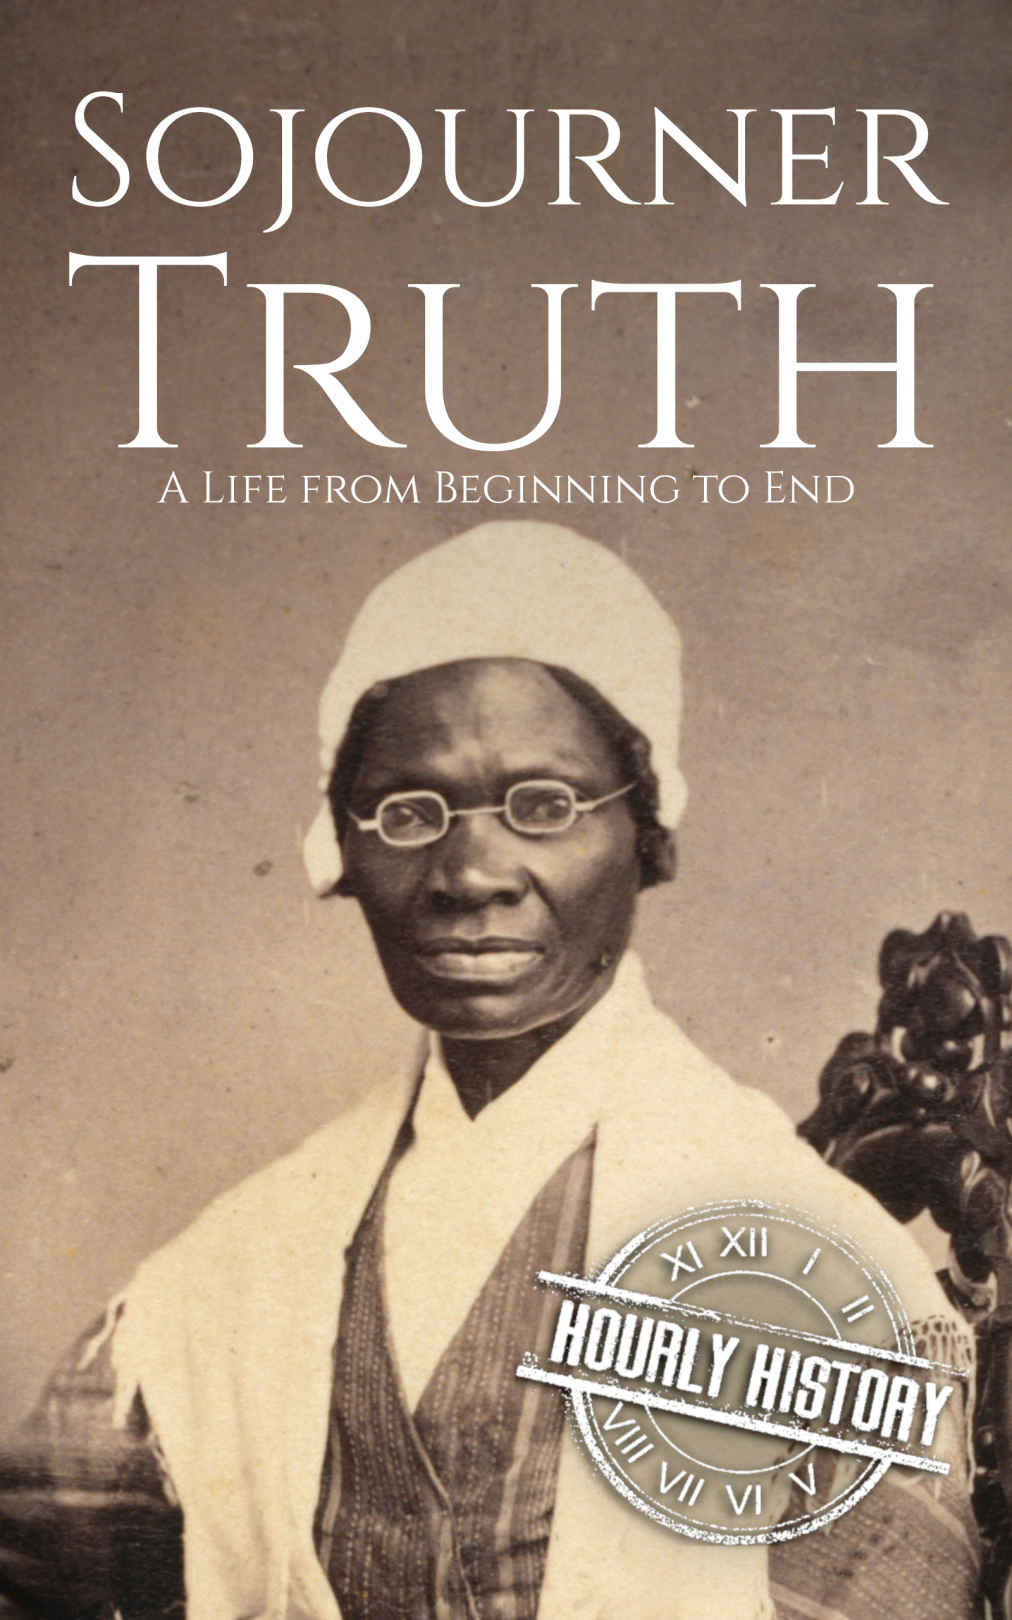 Sojourner Truth: A Life from Beginning to End